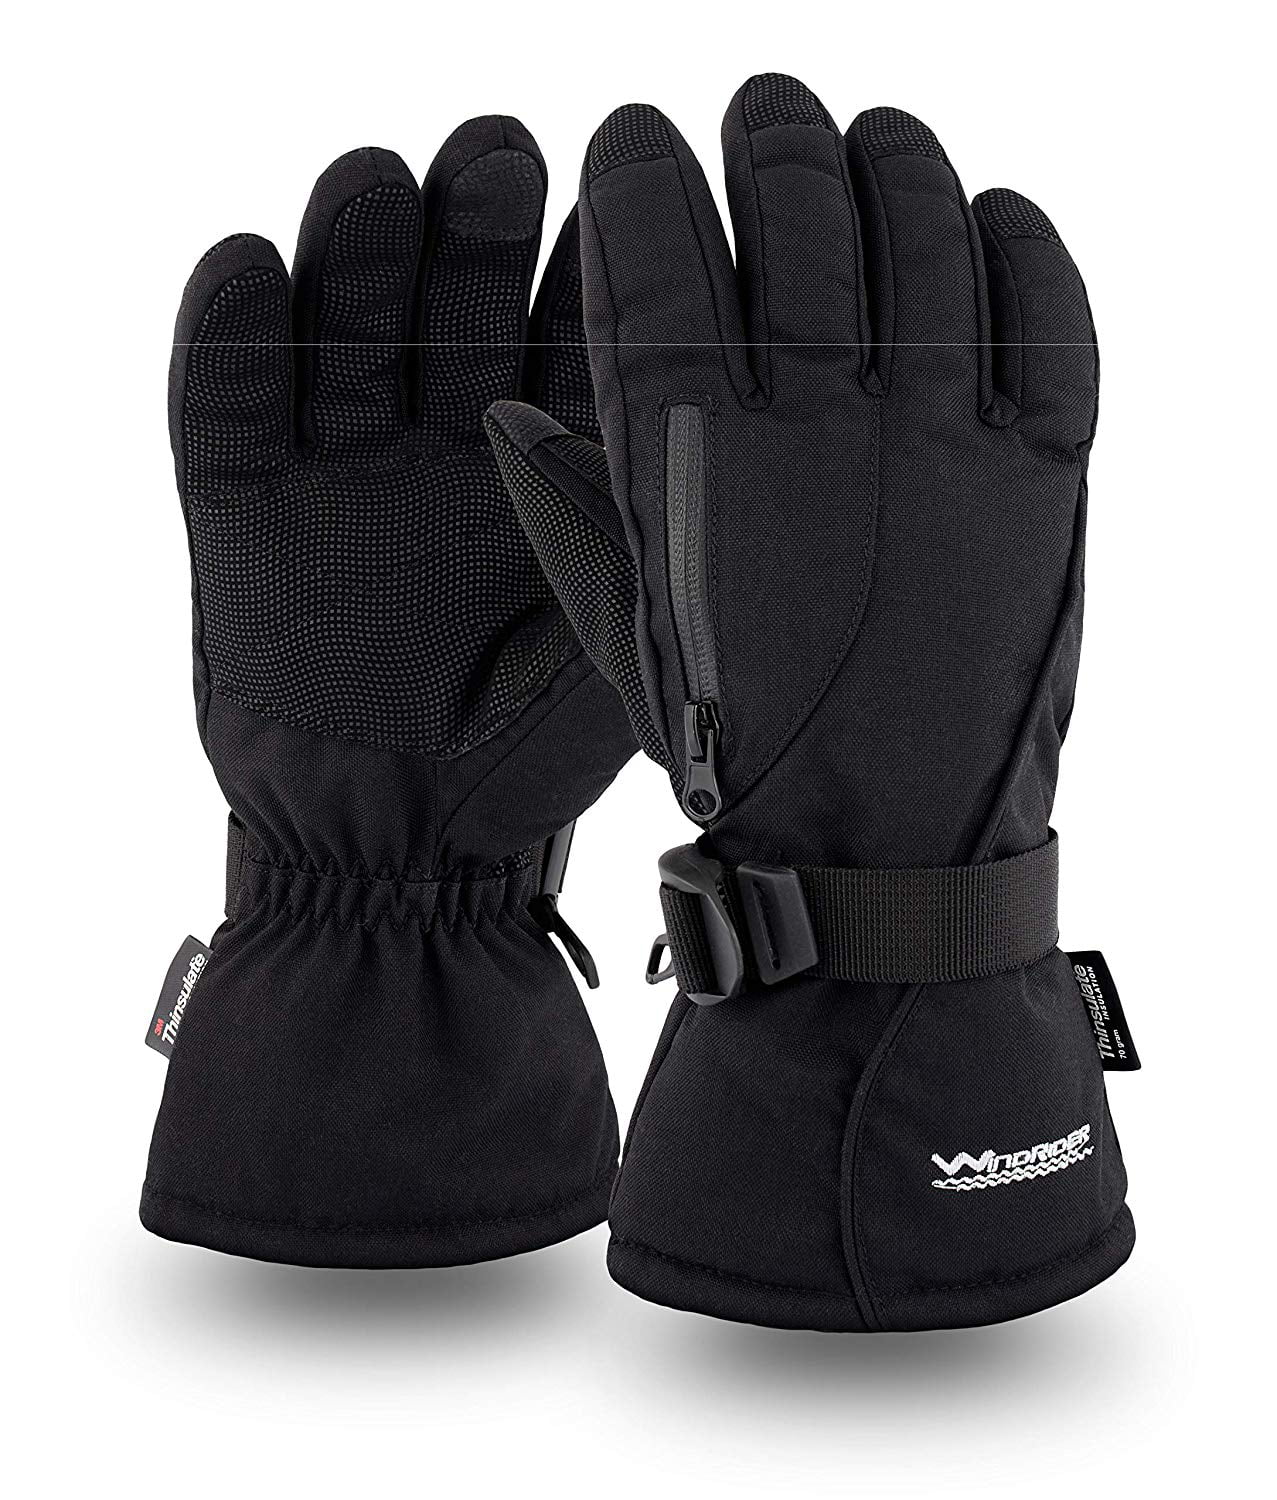 THINSULATE GLOVES BOSS EX-TREME RW Details about   NWT MEN'S SKI / SNOWMOBILE INSULATED 